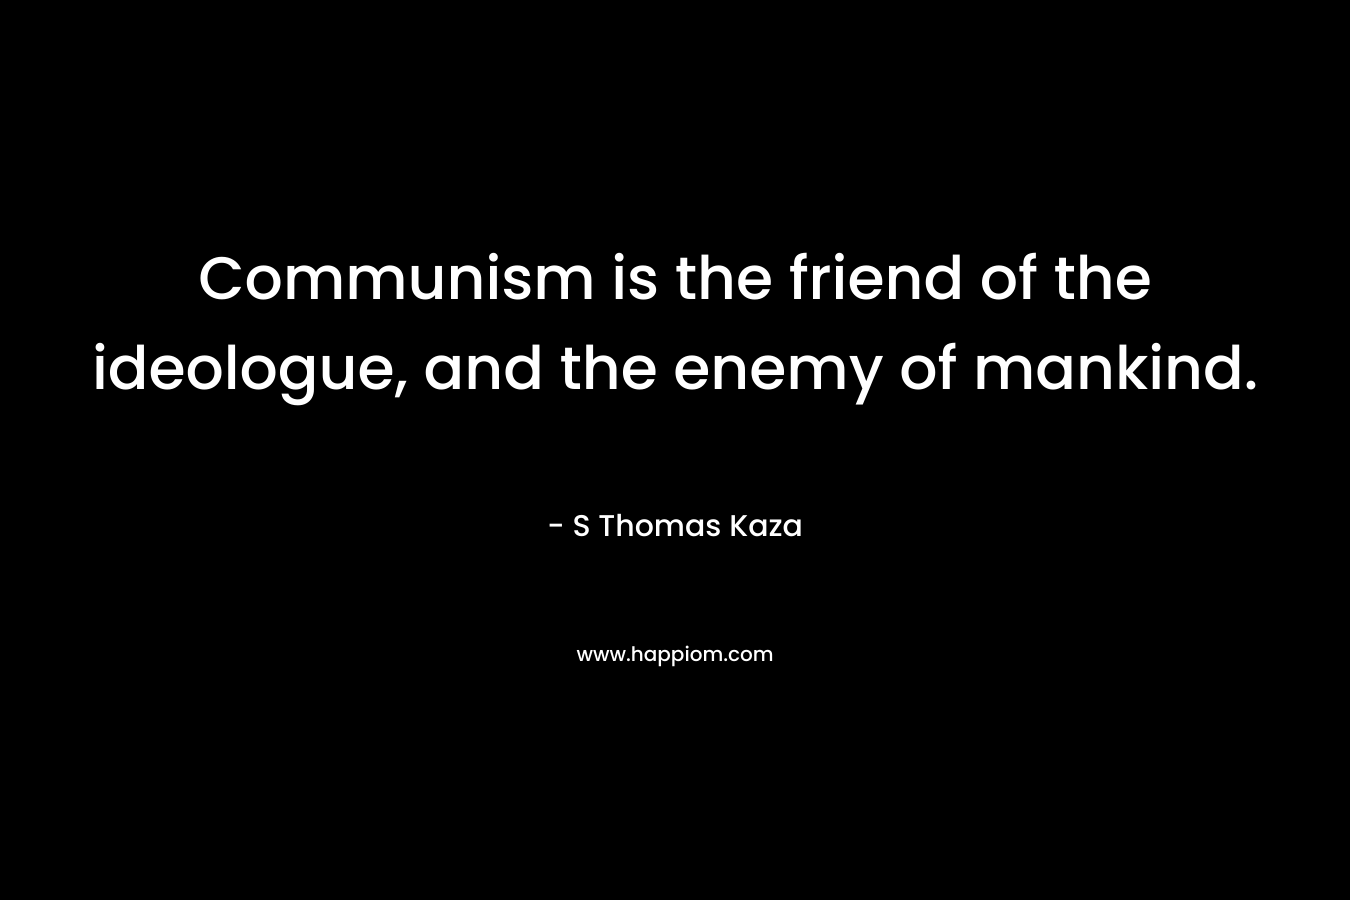 Communism is the friend of the ideologue, and the enemy of mankind. – S Thomas Kaza